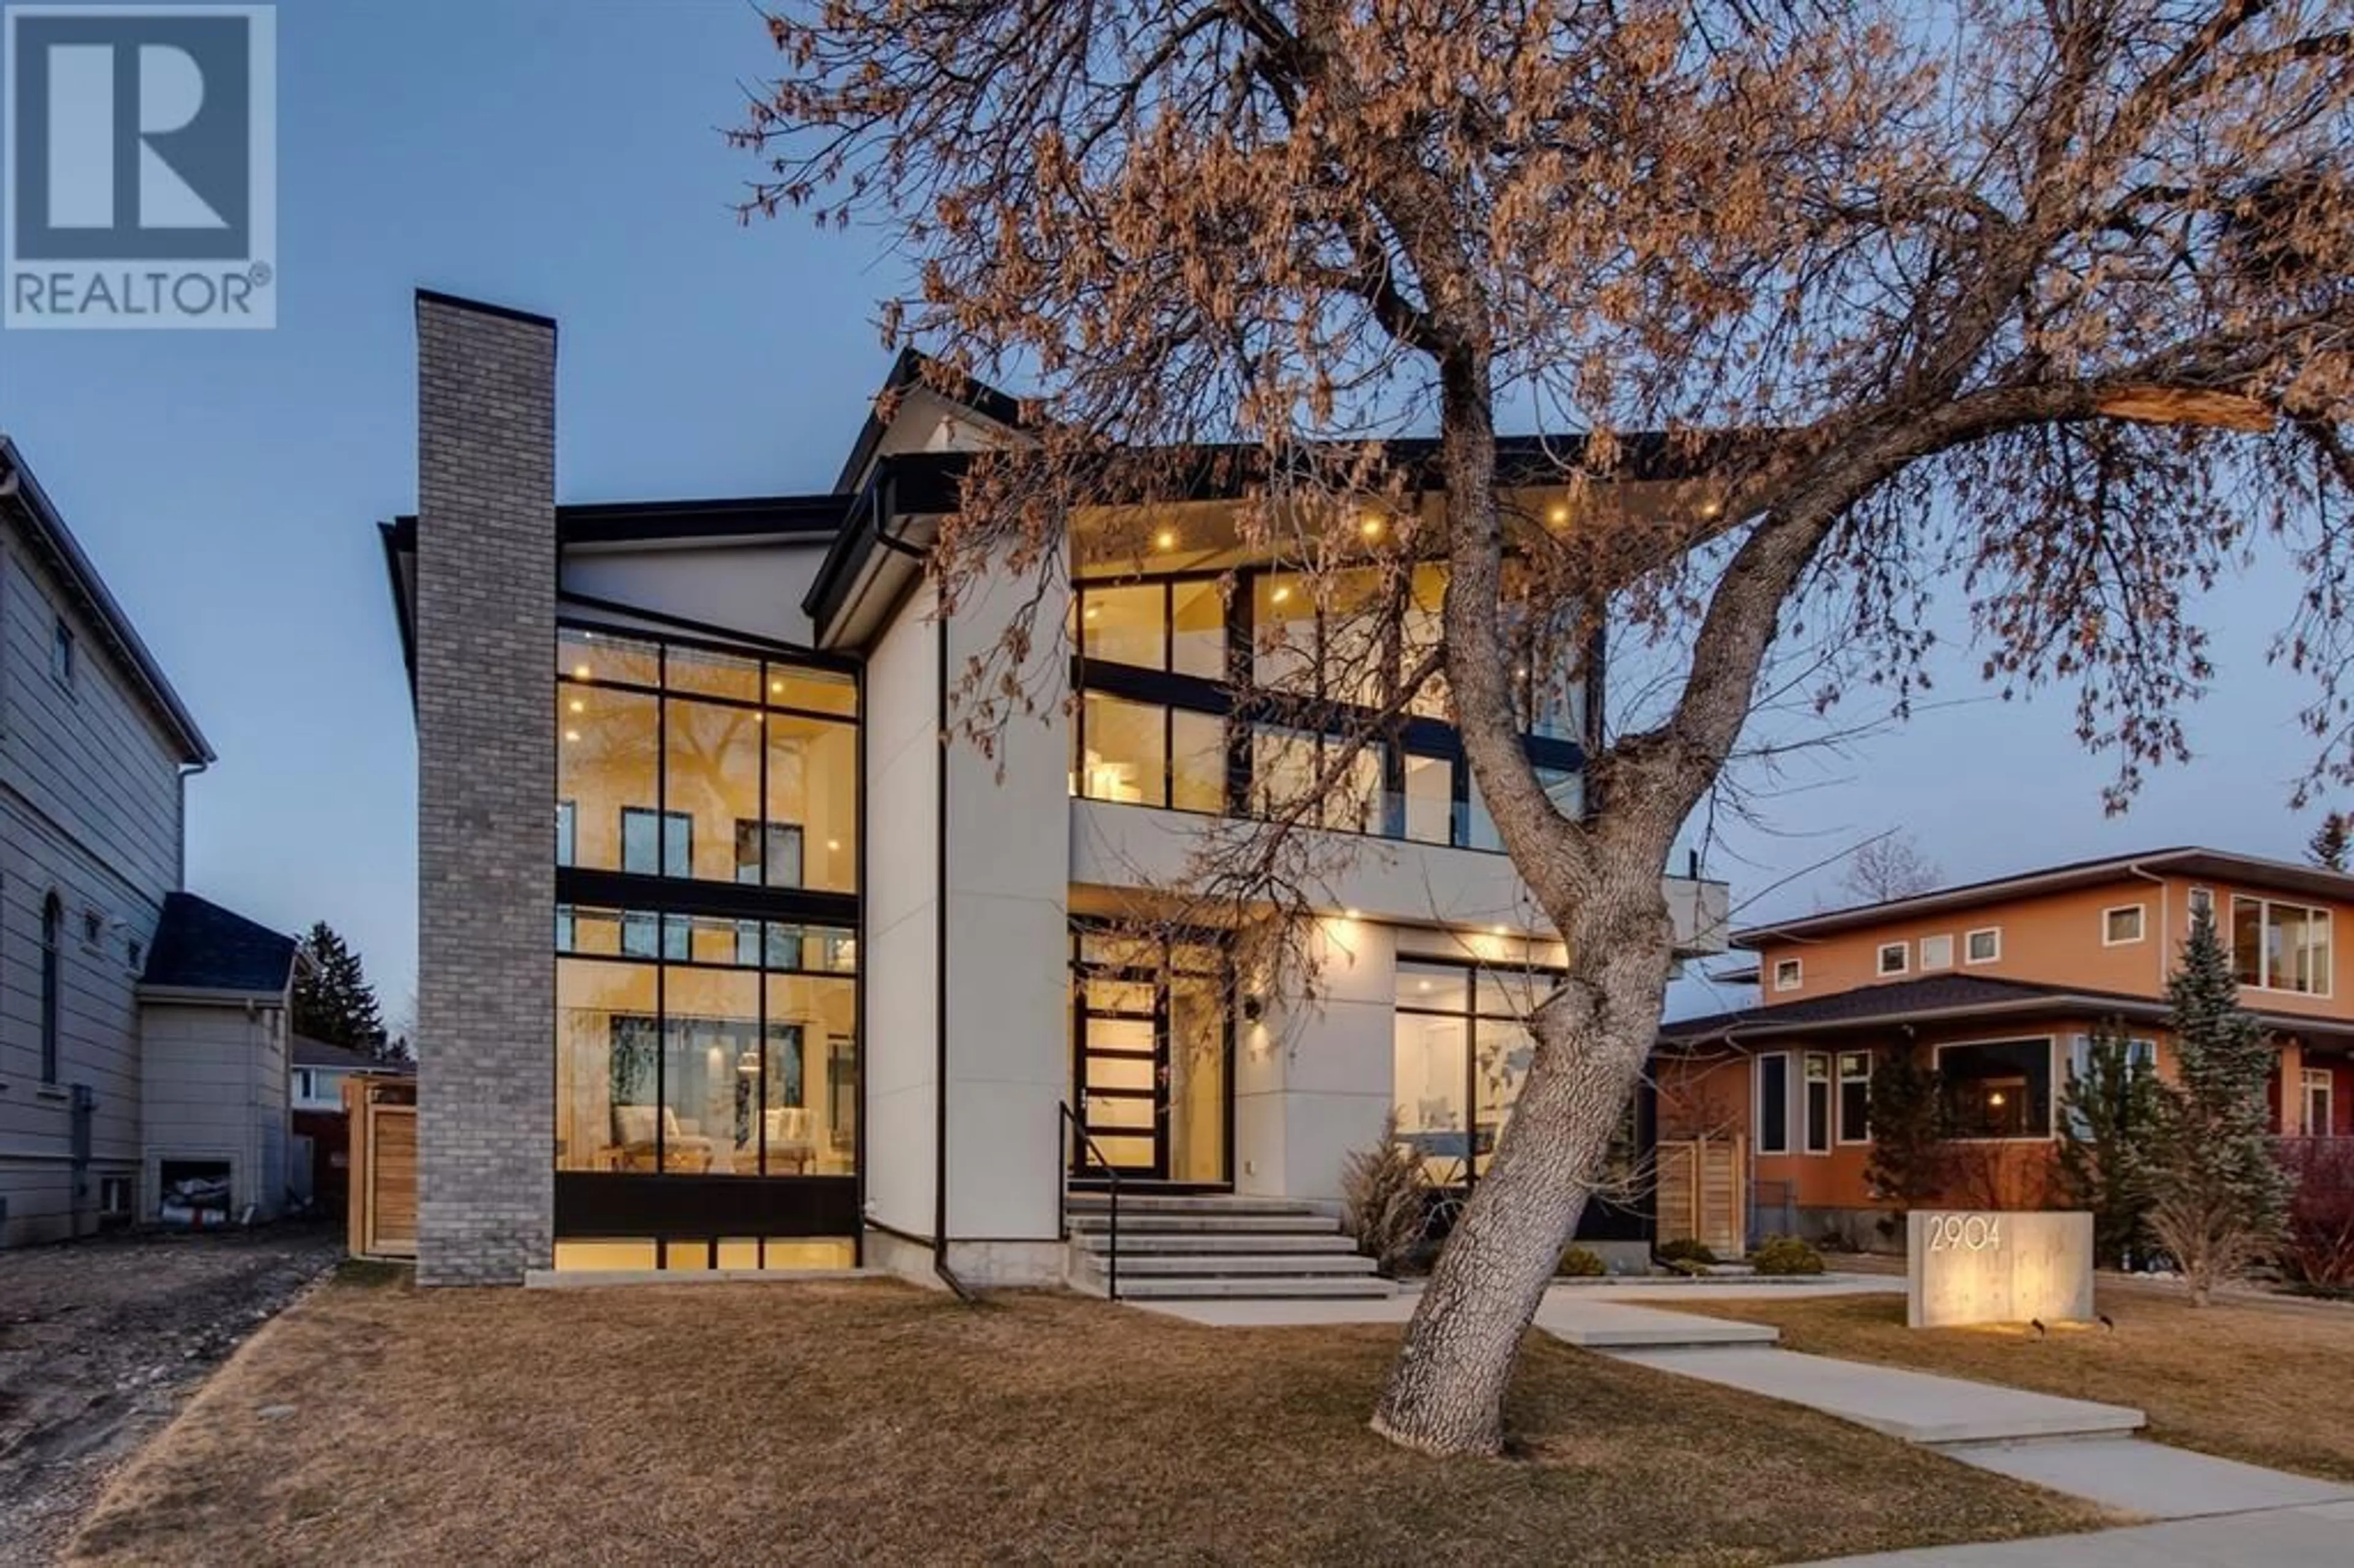 Home with brick exterior material for 2904 Toronto Crescent NW, Calgary Alberta T2N3W2